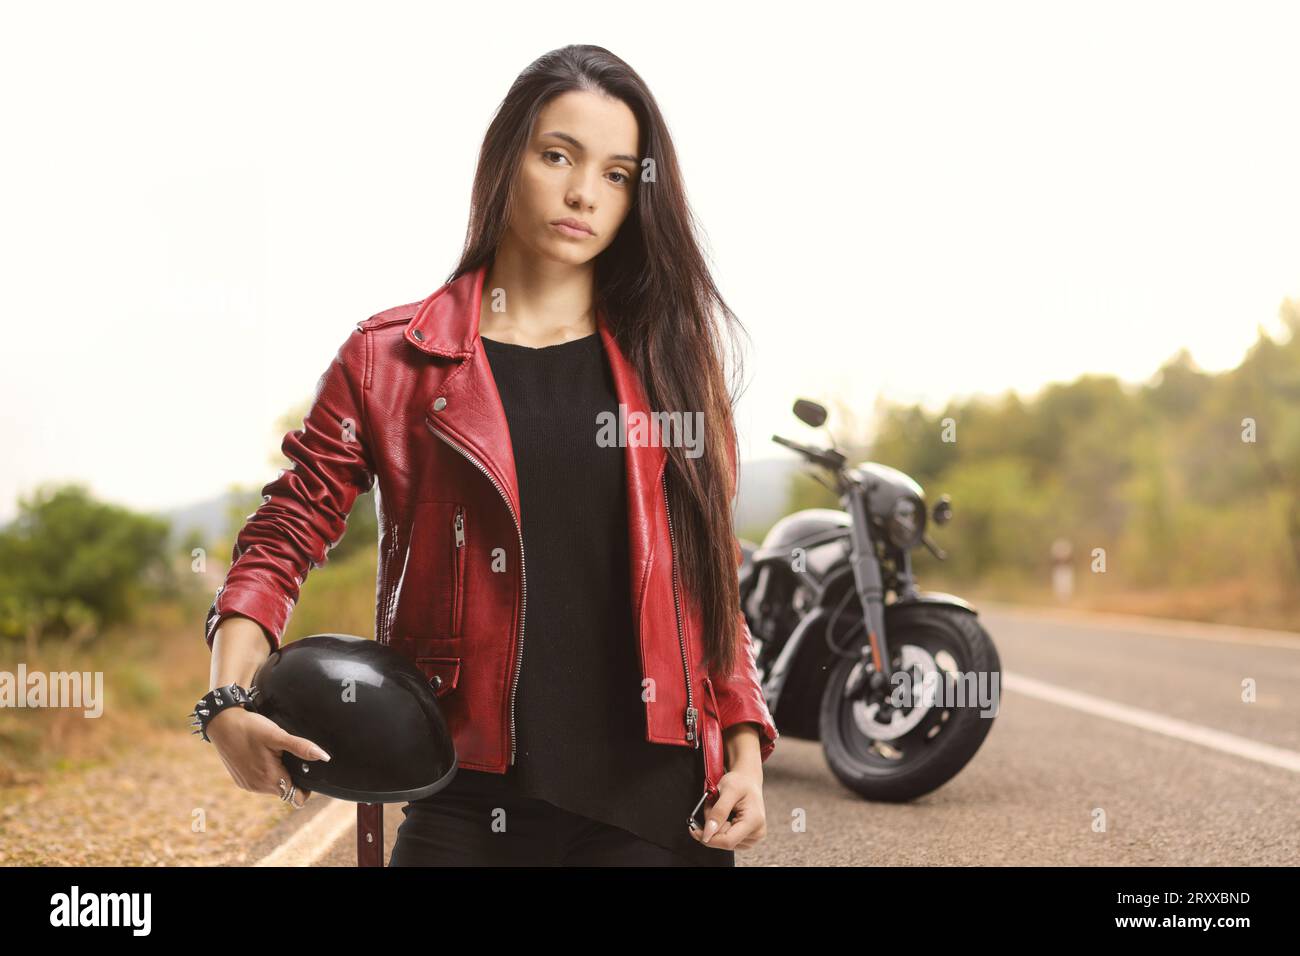 Serious young female holding a motorbike helmet in front of a chopper on the road Stock Photo